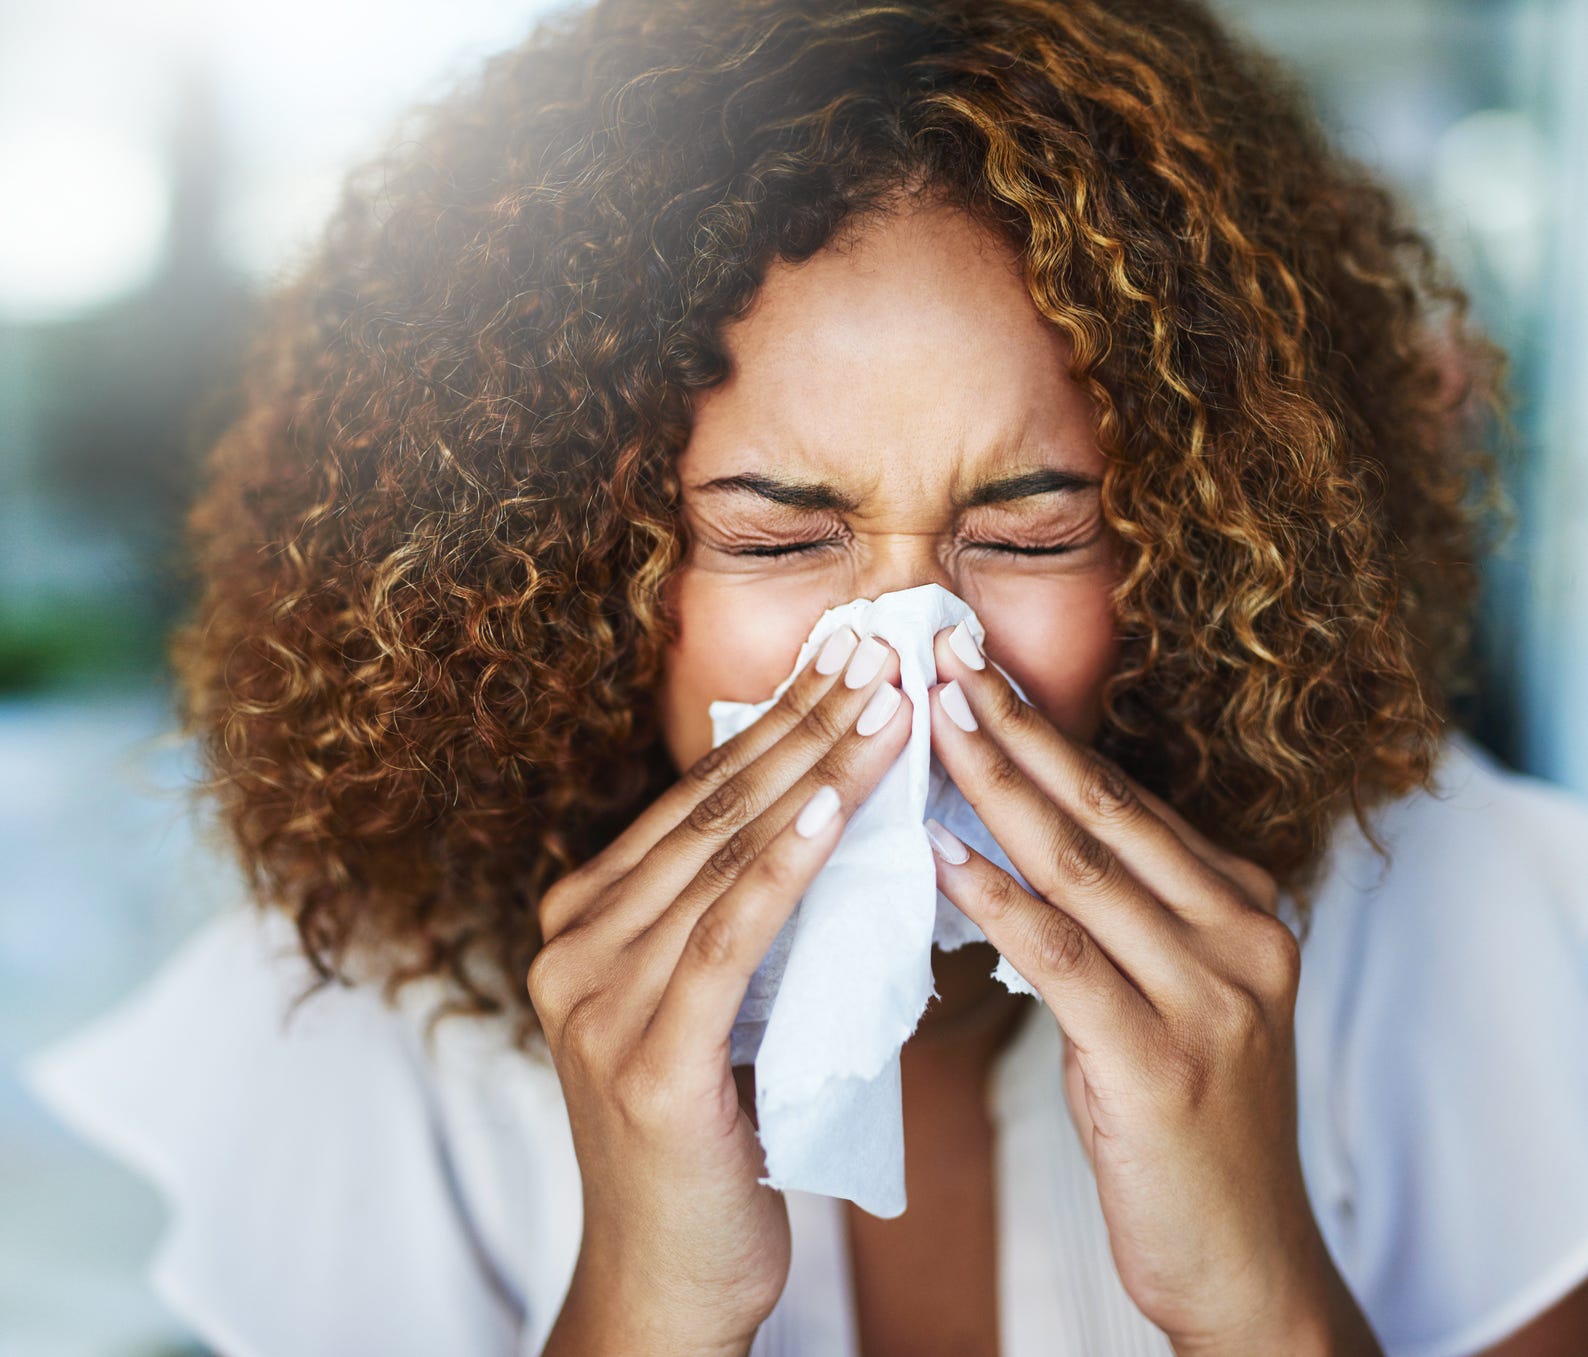 Runny nose, fever and cough are all symptoms of the flu.